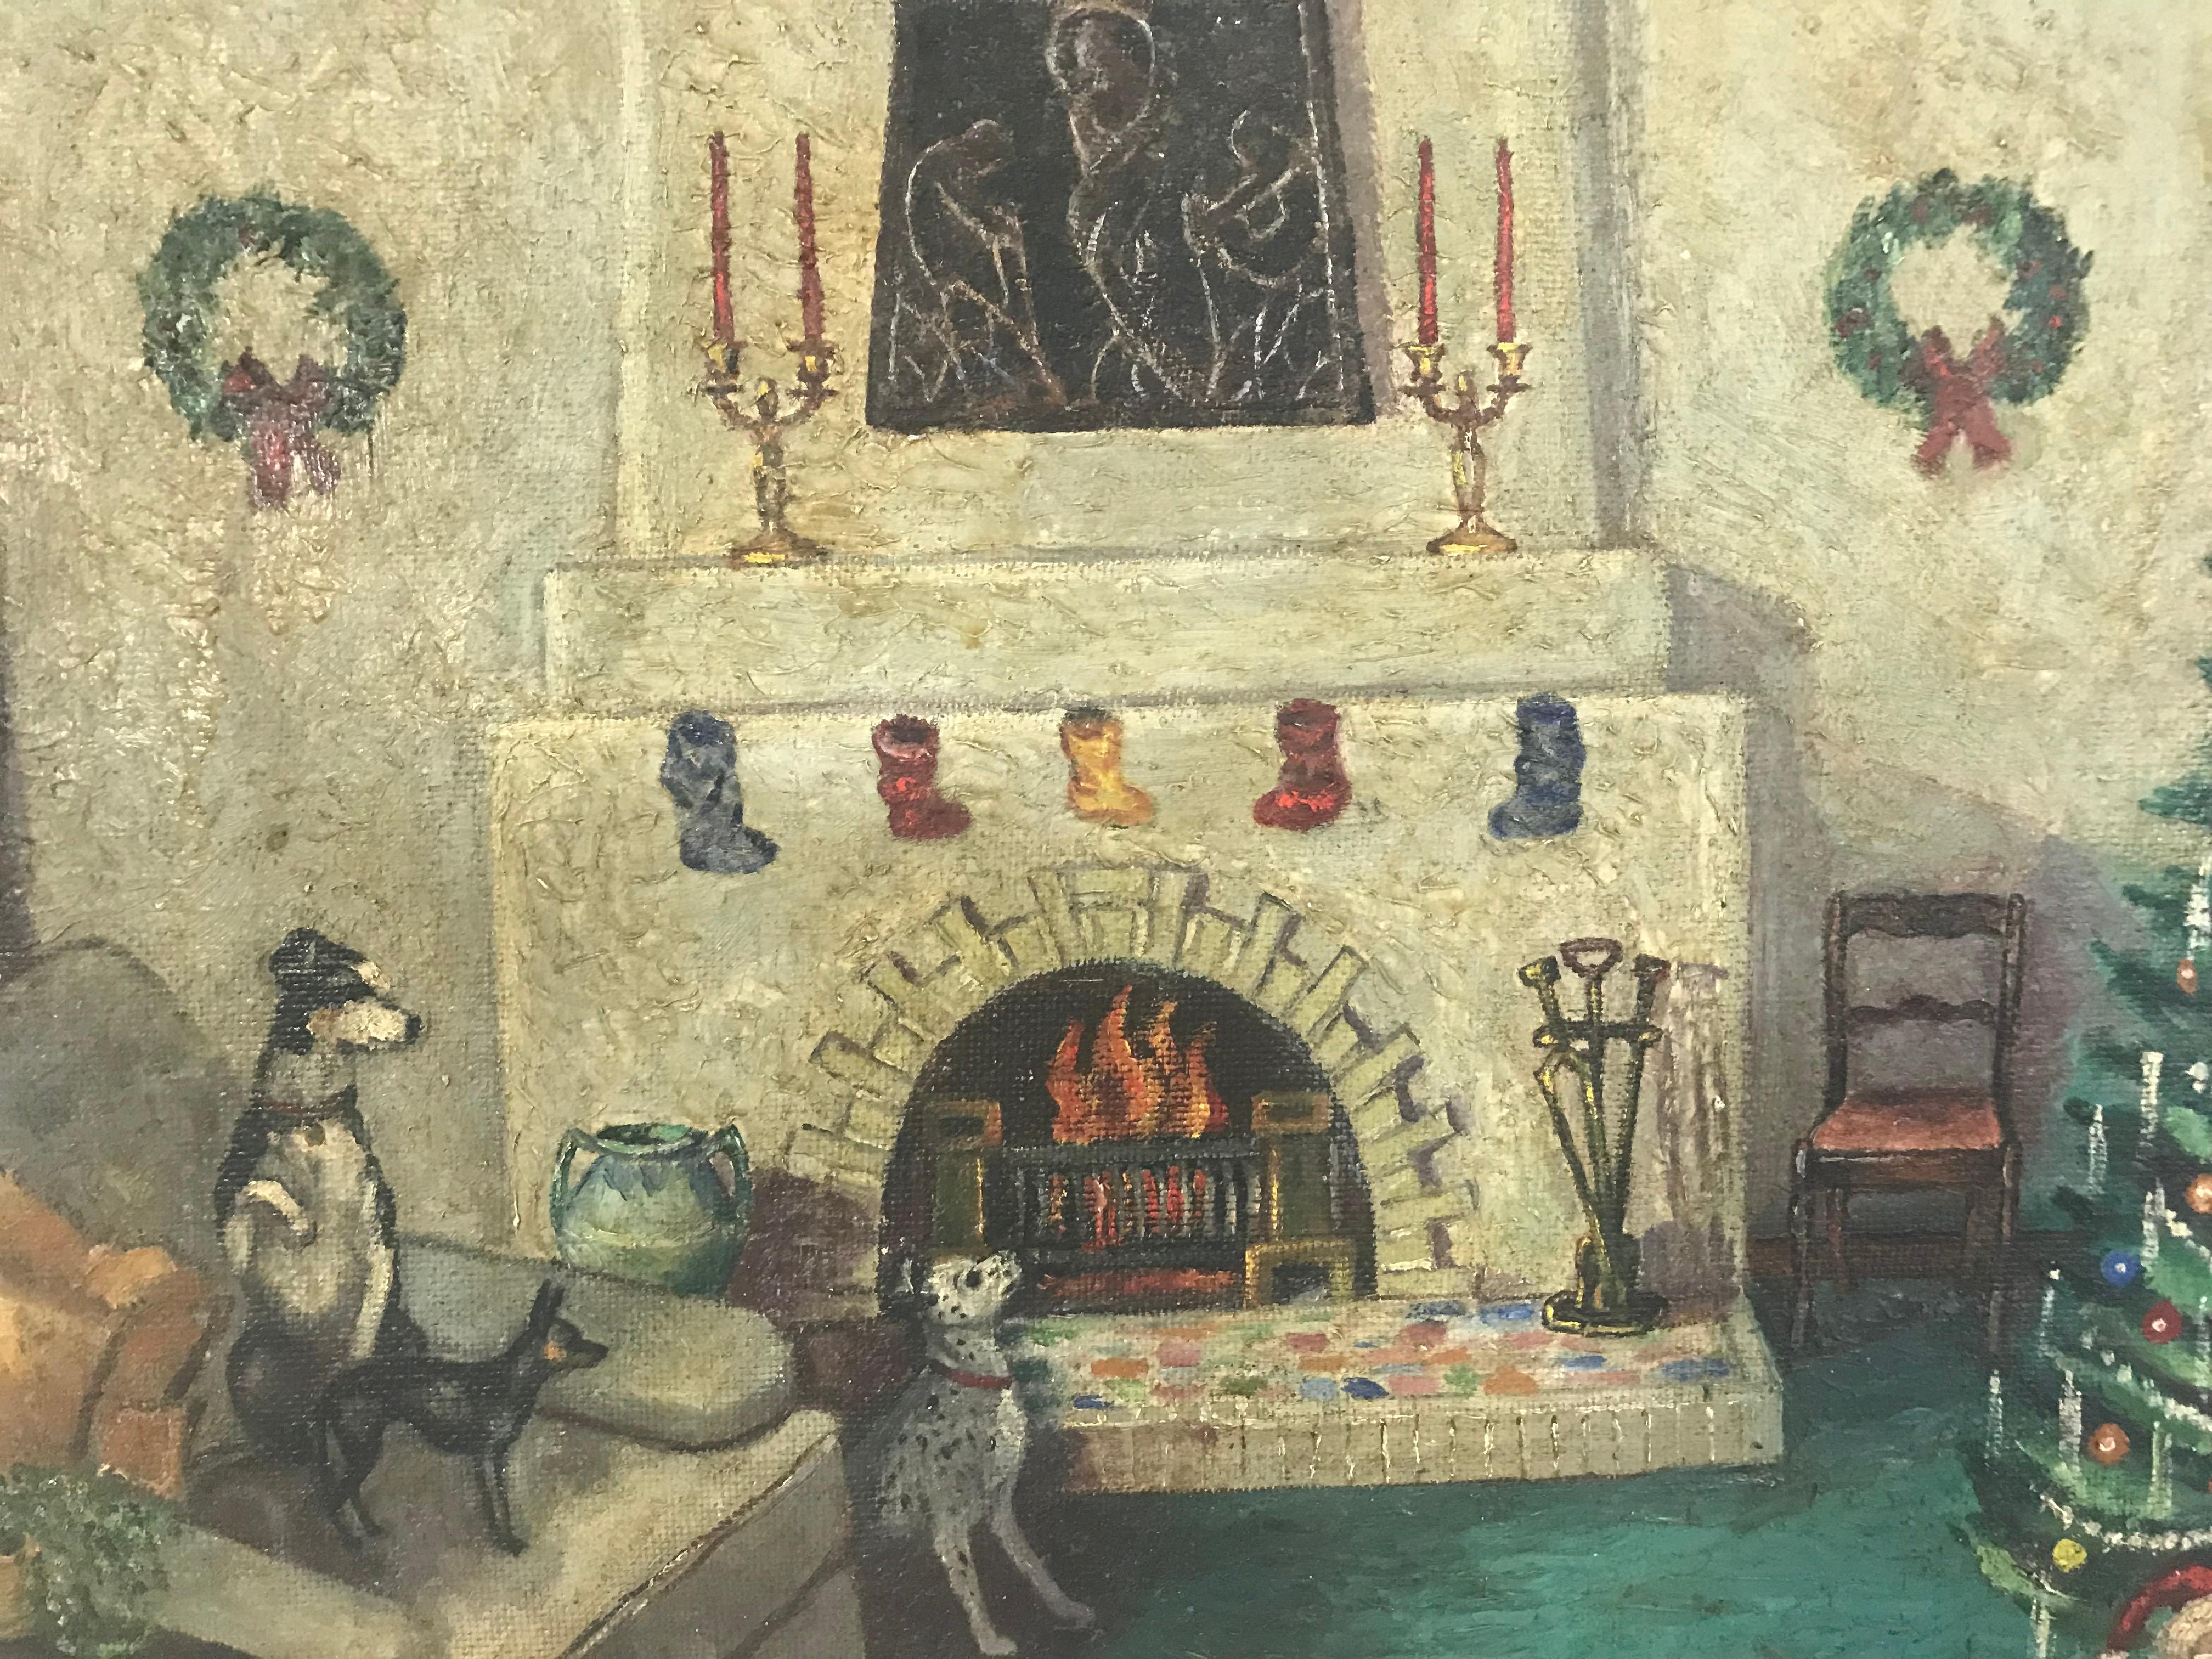 American Painting of a Pack of Dogs and a Small Santa on Christmas